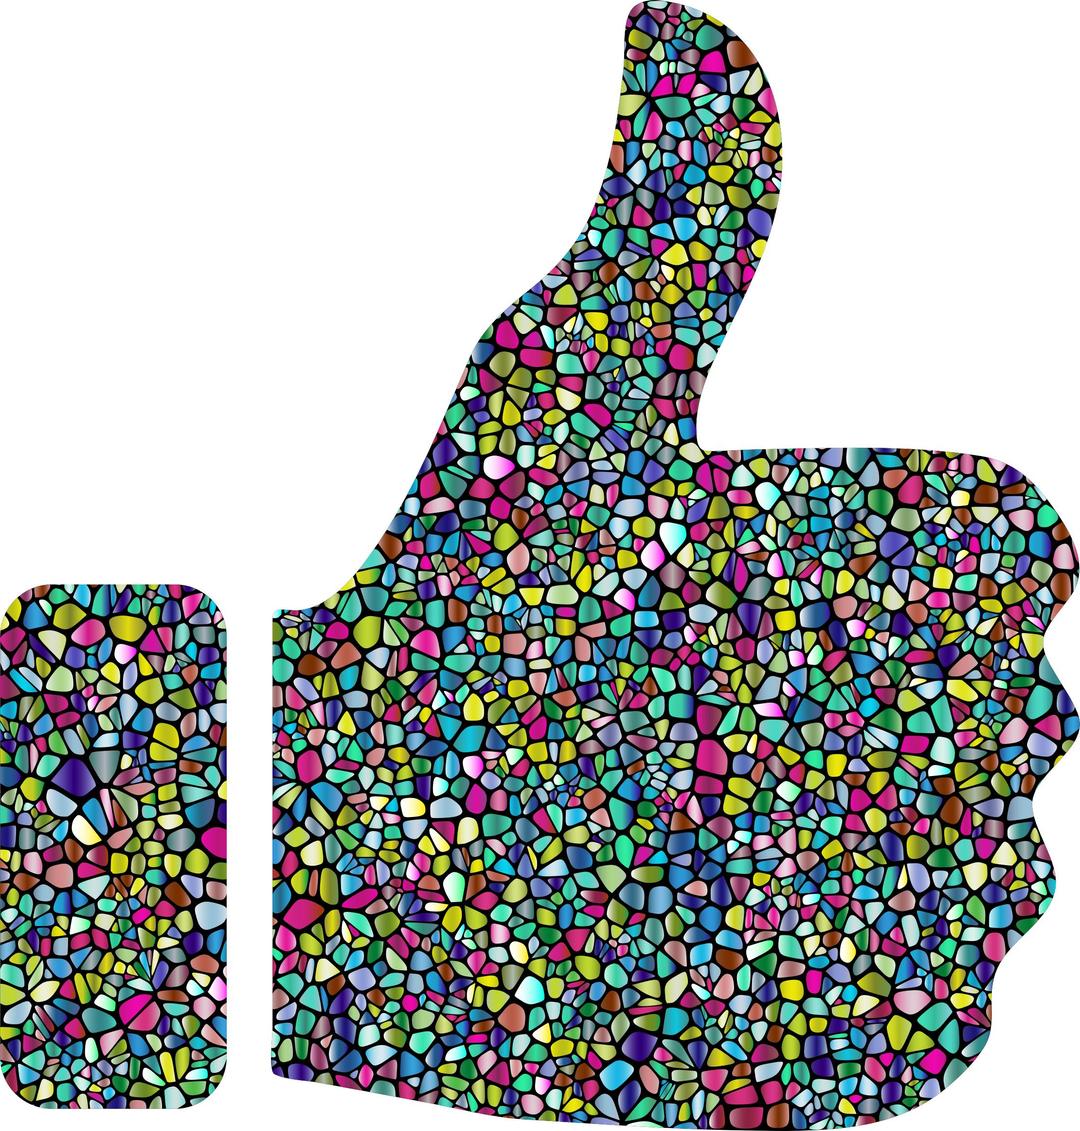 Polyprismatic Tiled Thumbs Up With Background png transparent